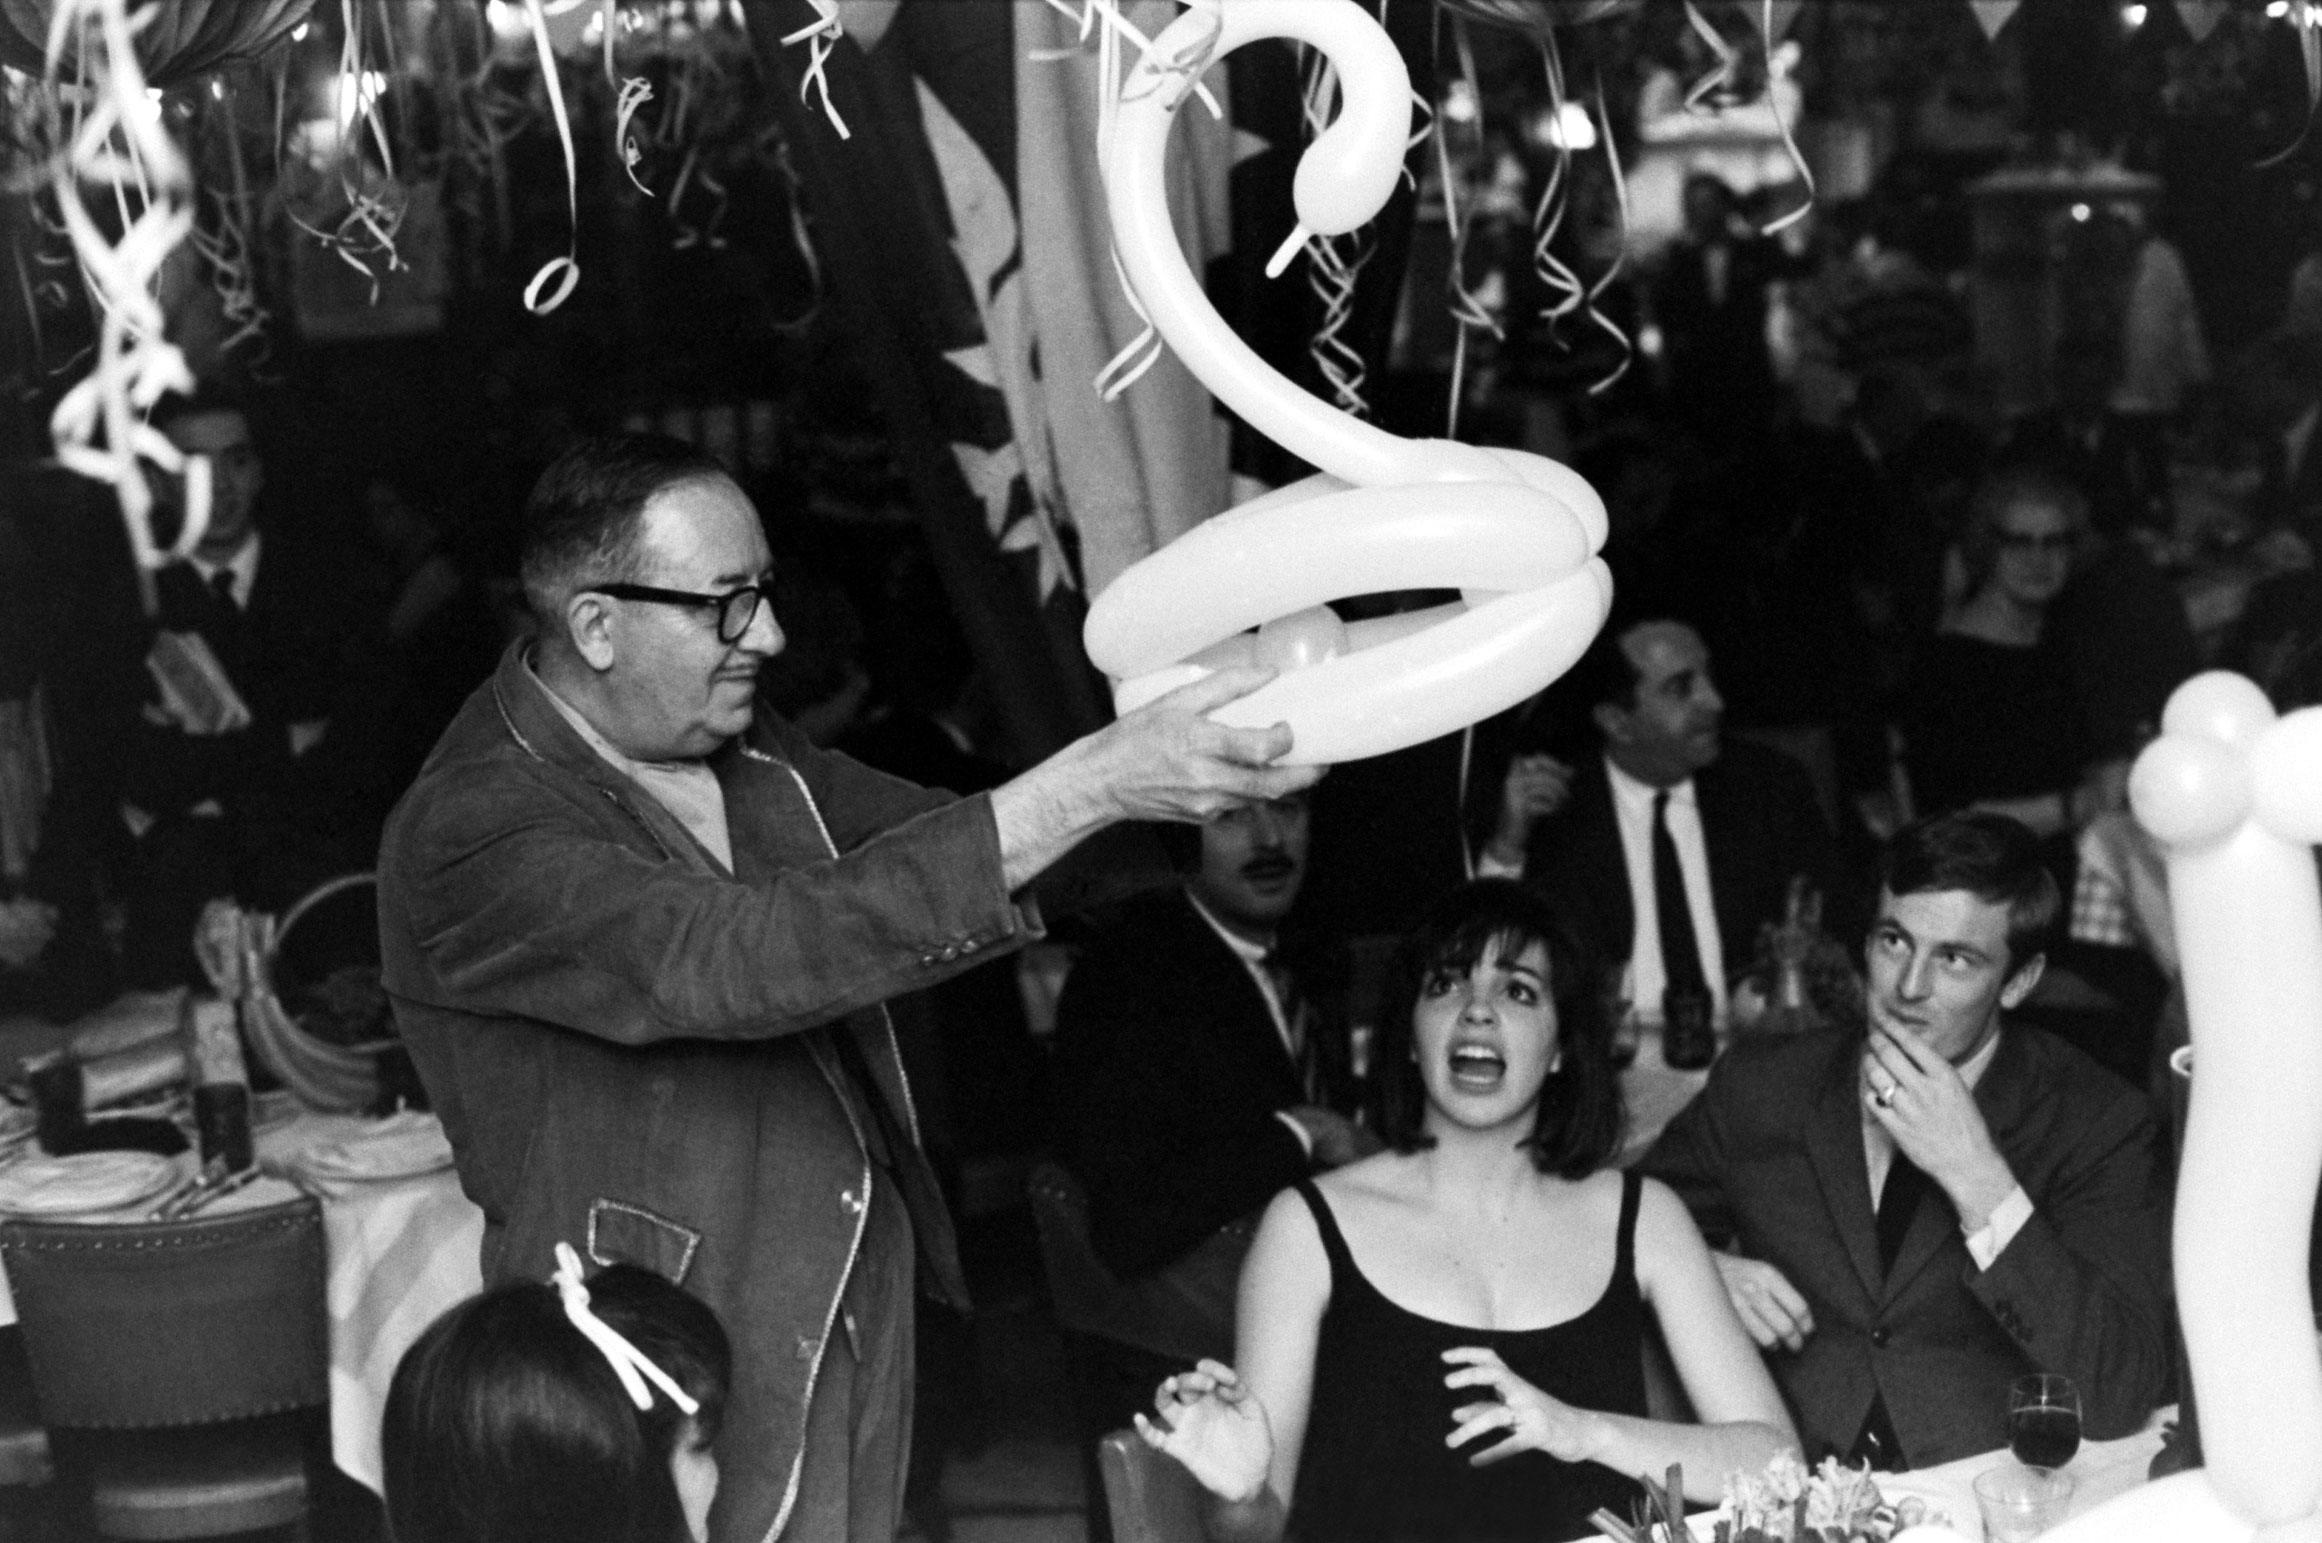 Liza Minnelli reacts as an unidentified well-wisher at her 19th birthday party presents her with a swan-shaped balloon.